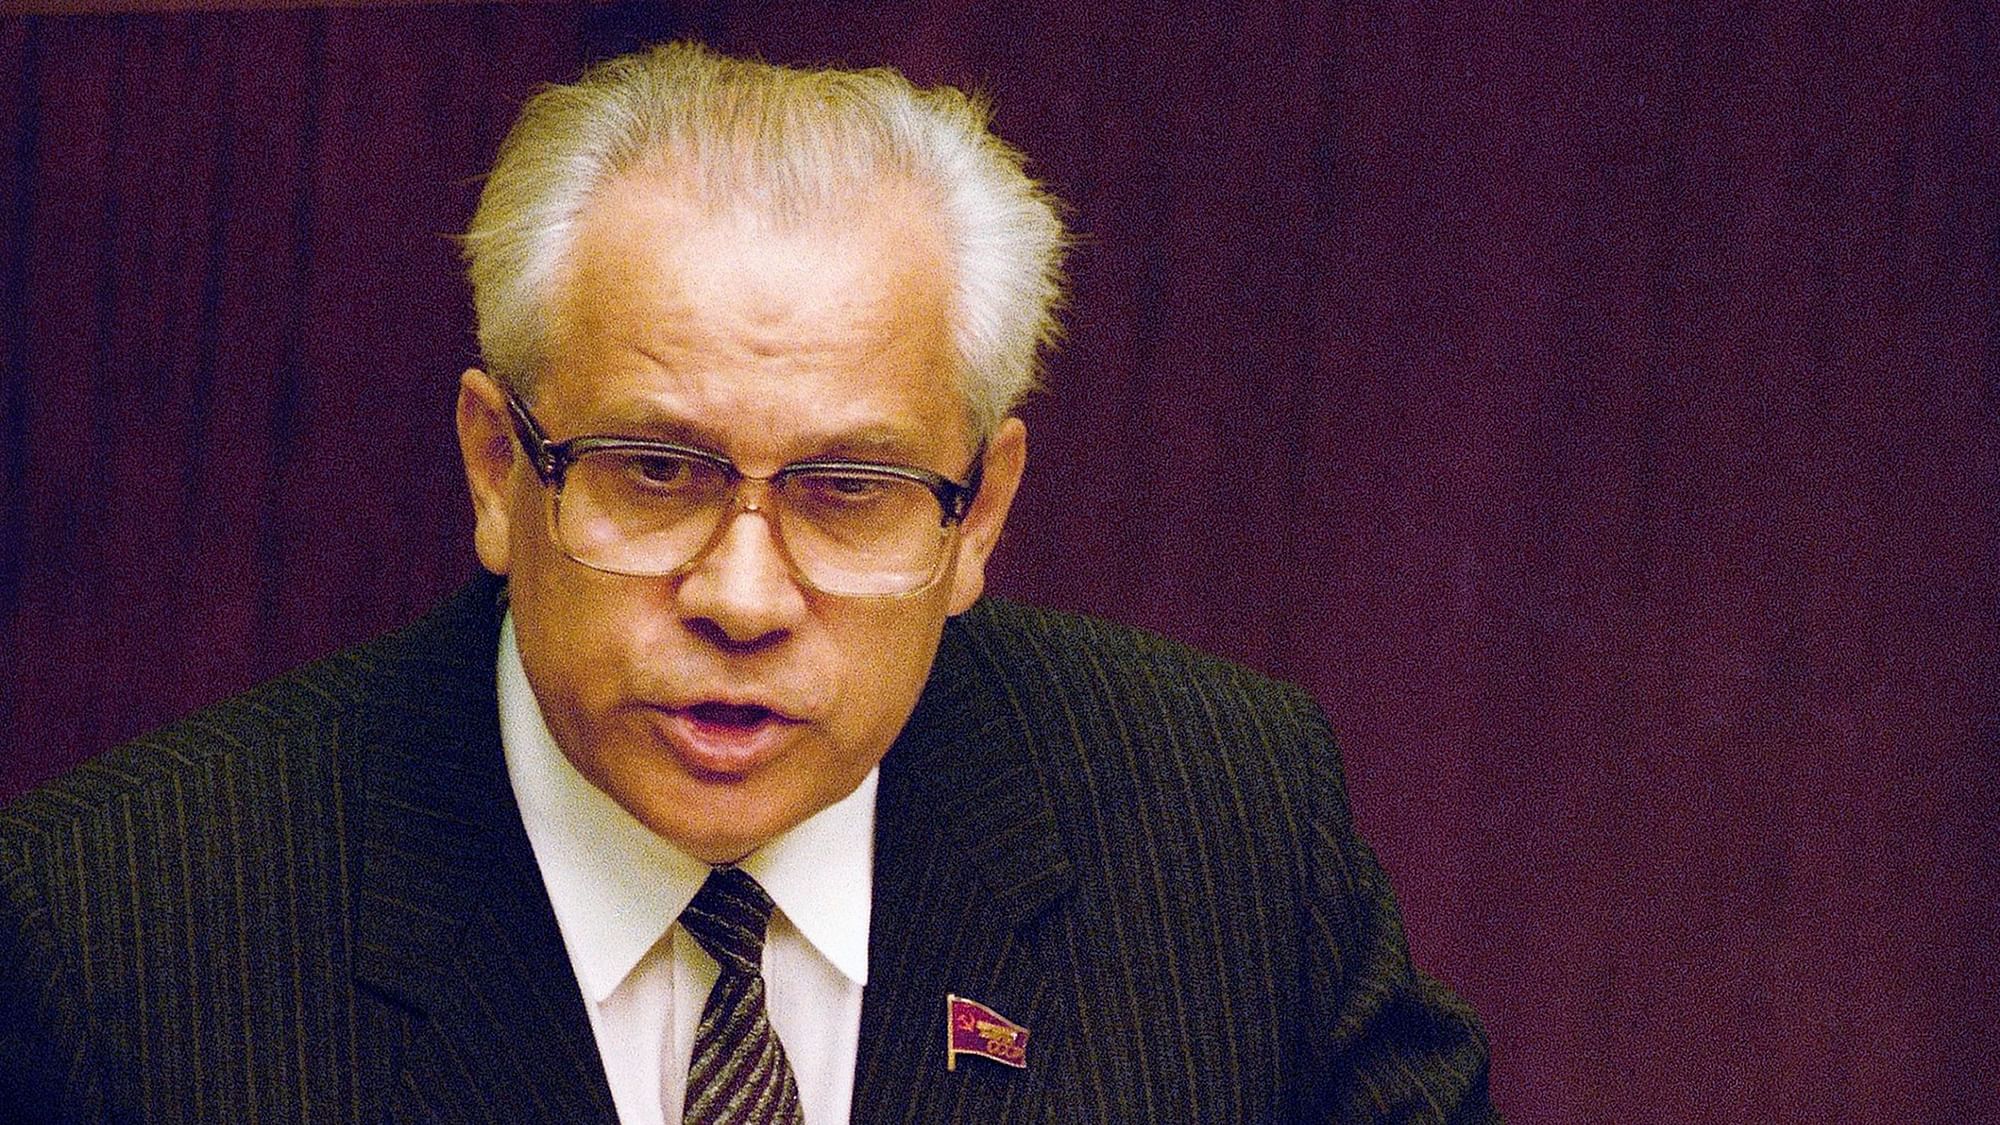  Former chairperson of the Supreme Soviet Anatoly Lukyanov has died at the age of 88.